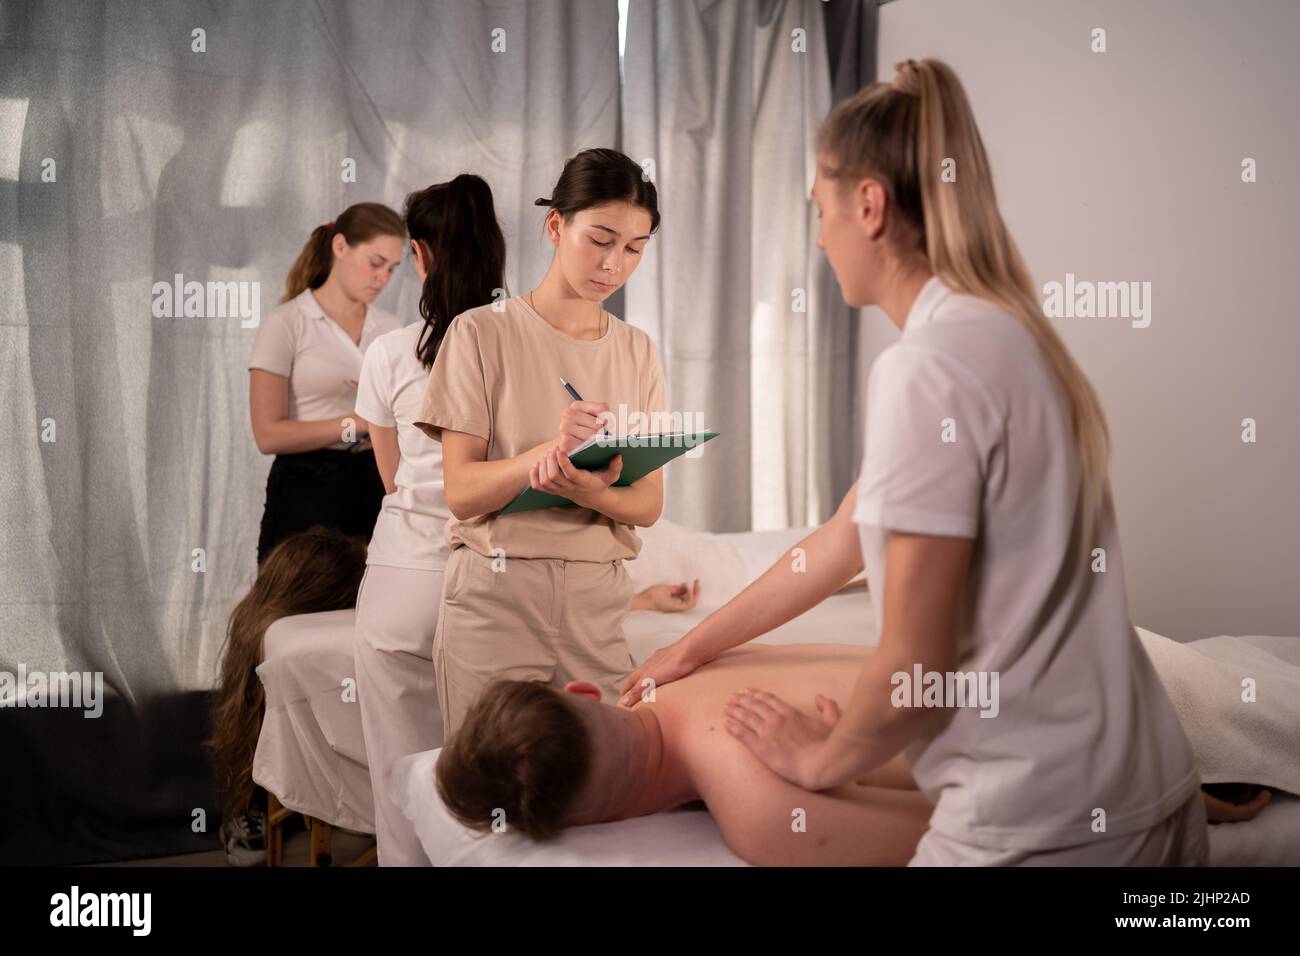 Teacher helping student training to become masseuse, women doing back massage to patient, wellness massage training concept Stock Photo